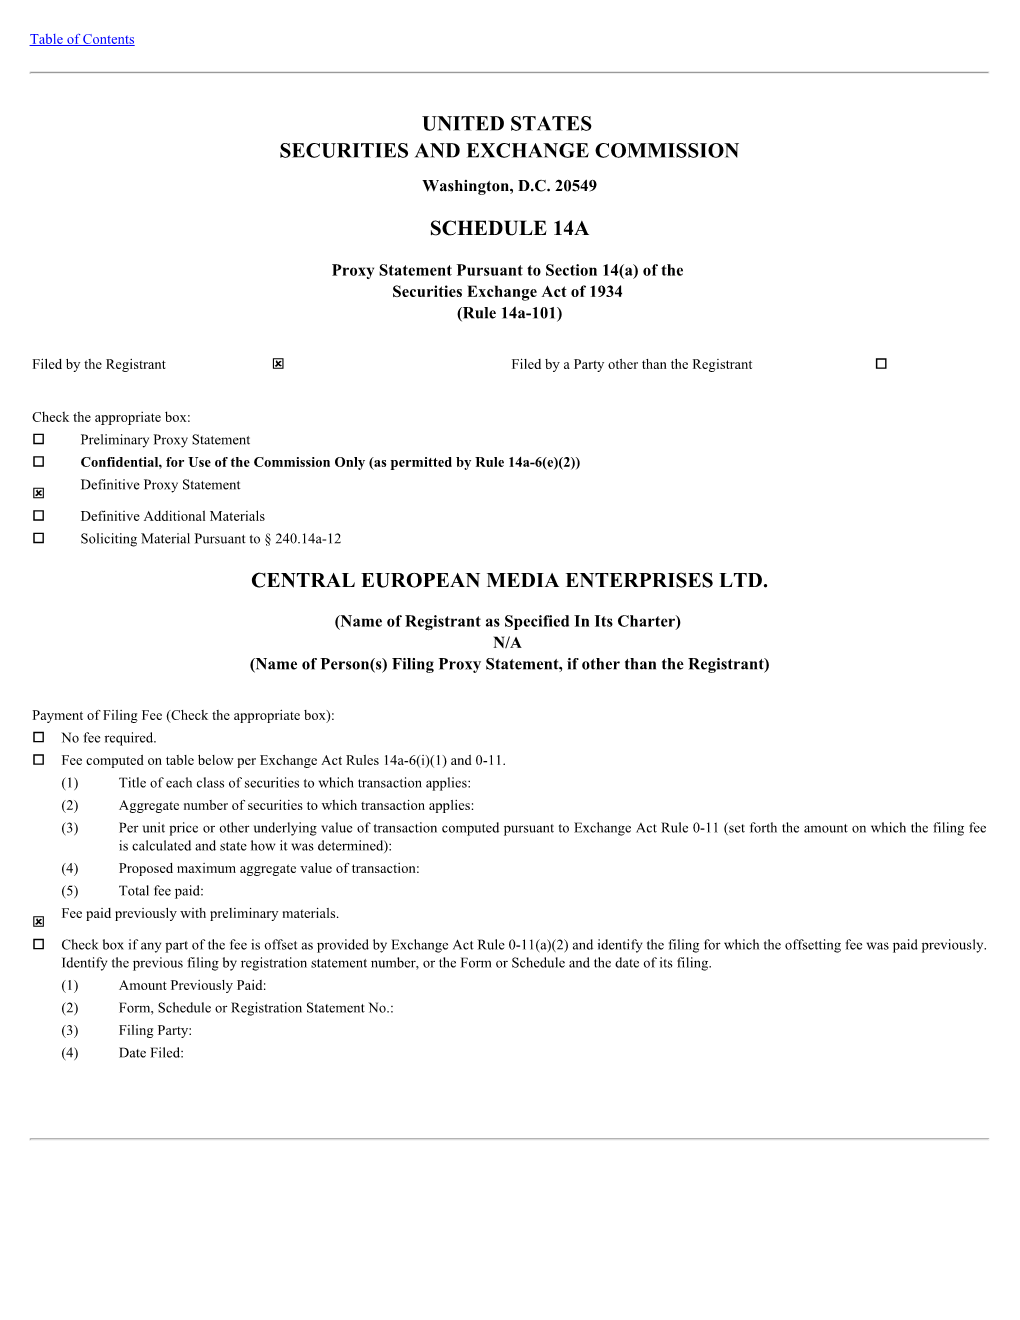 United States Securities and Exchange Commission Schedule 14A Central European Media Enterprises Ltd